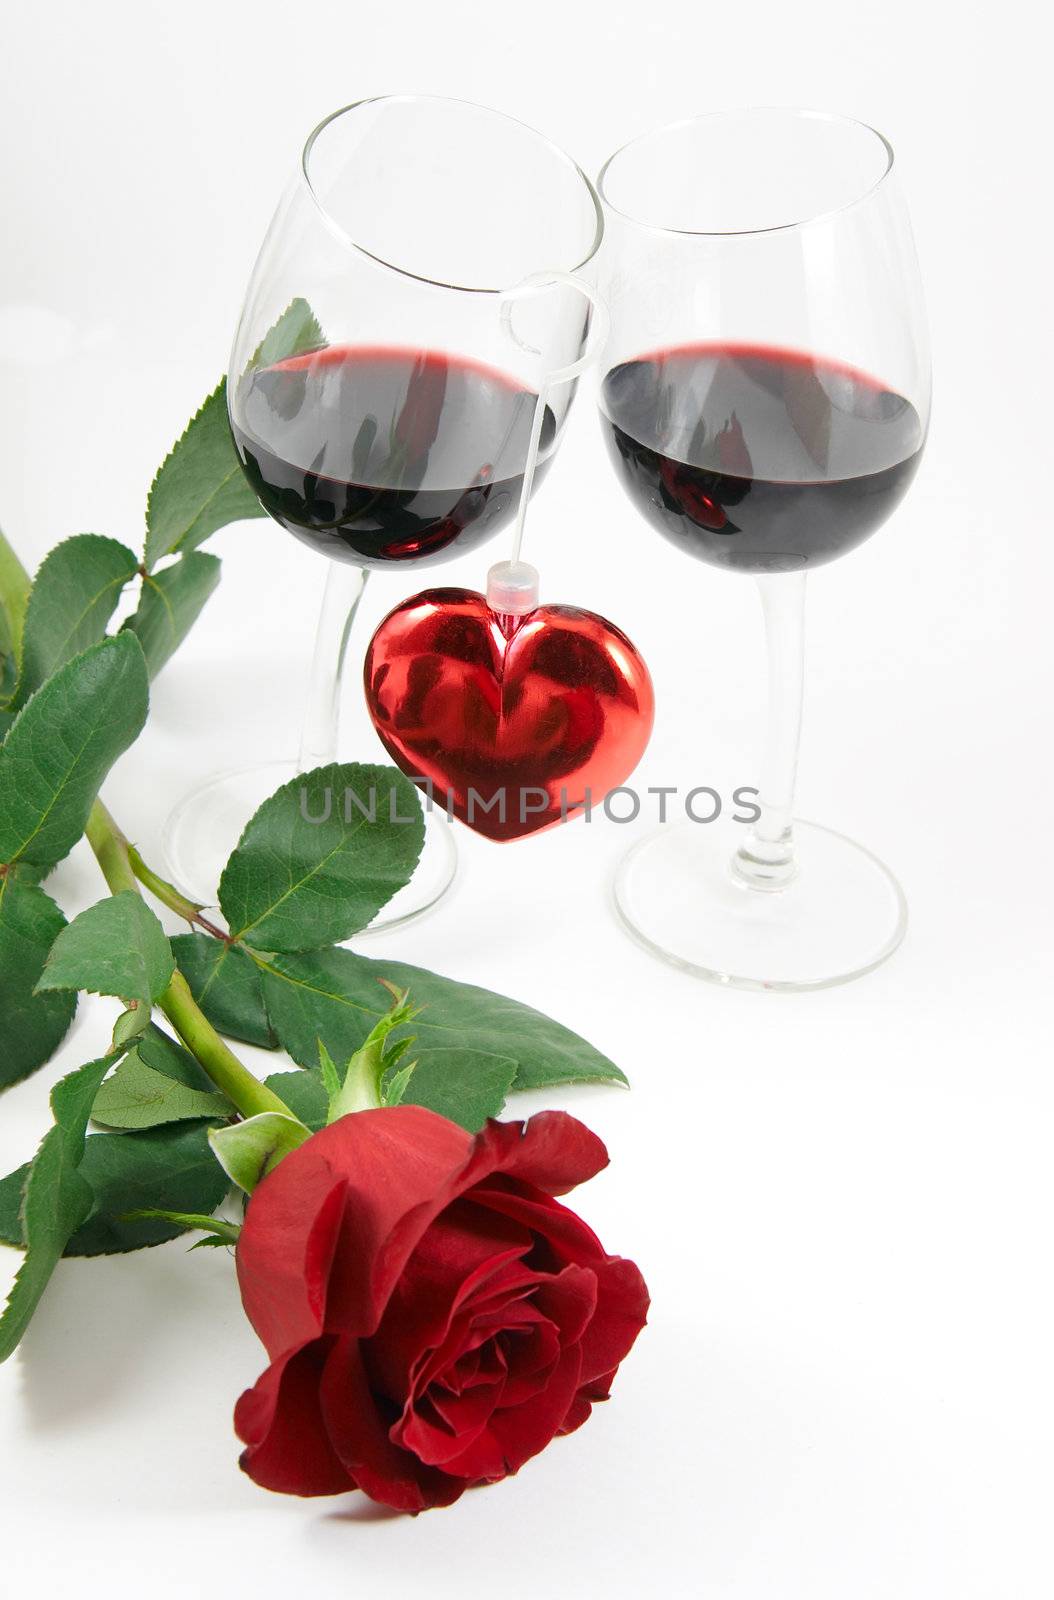 Rose, heart and two glasses by serpl